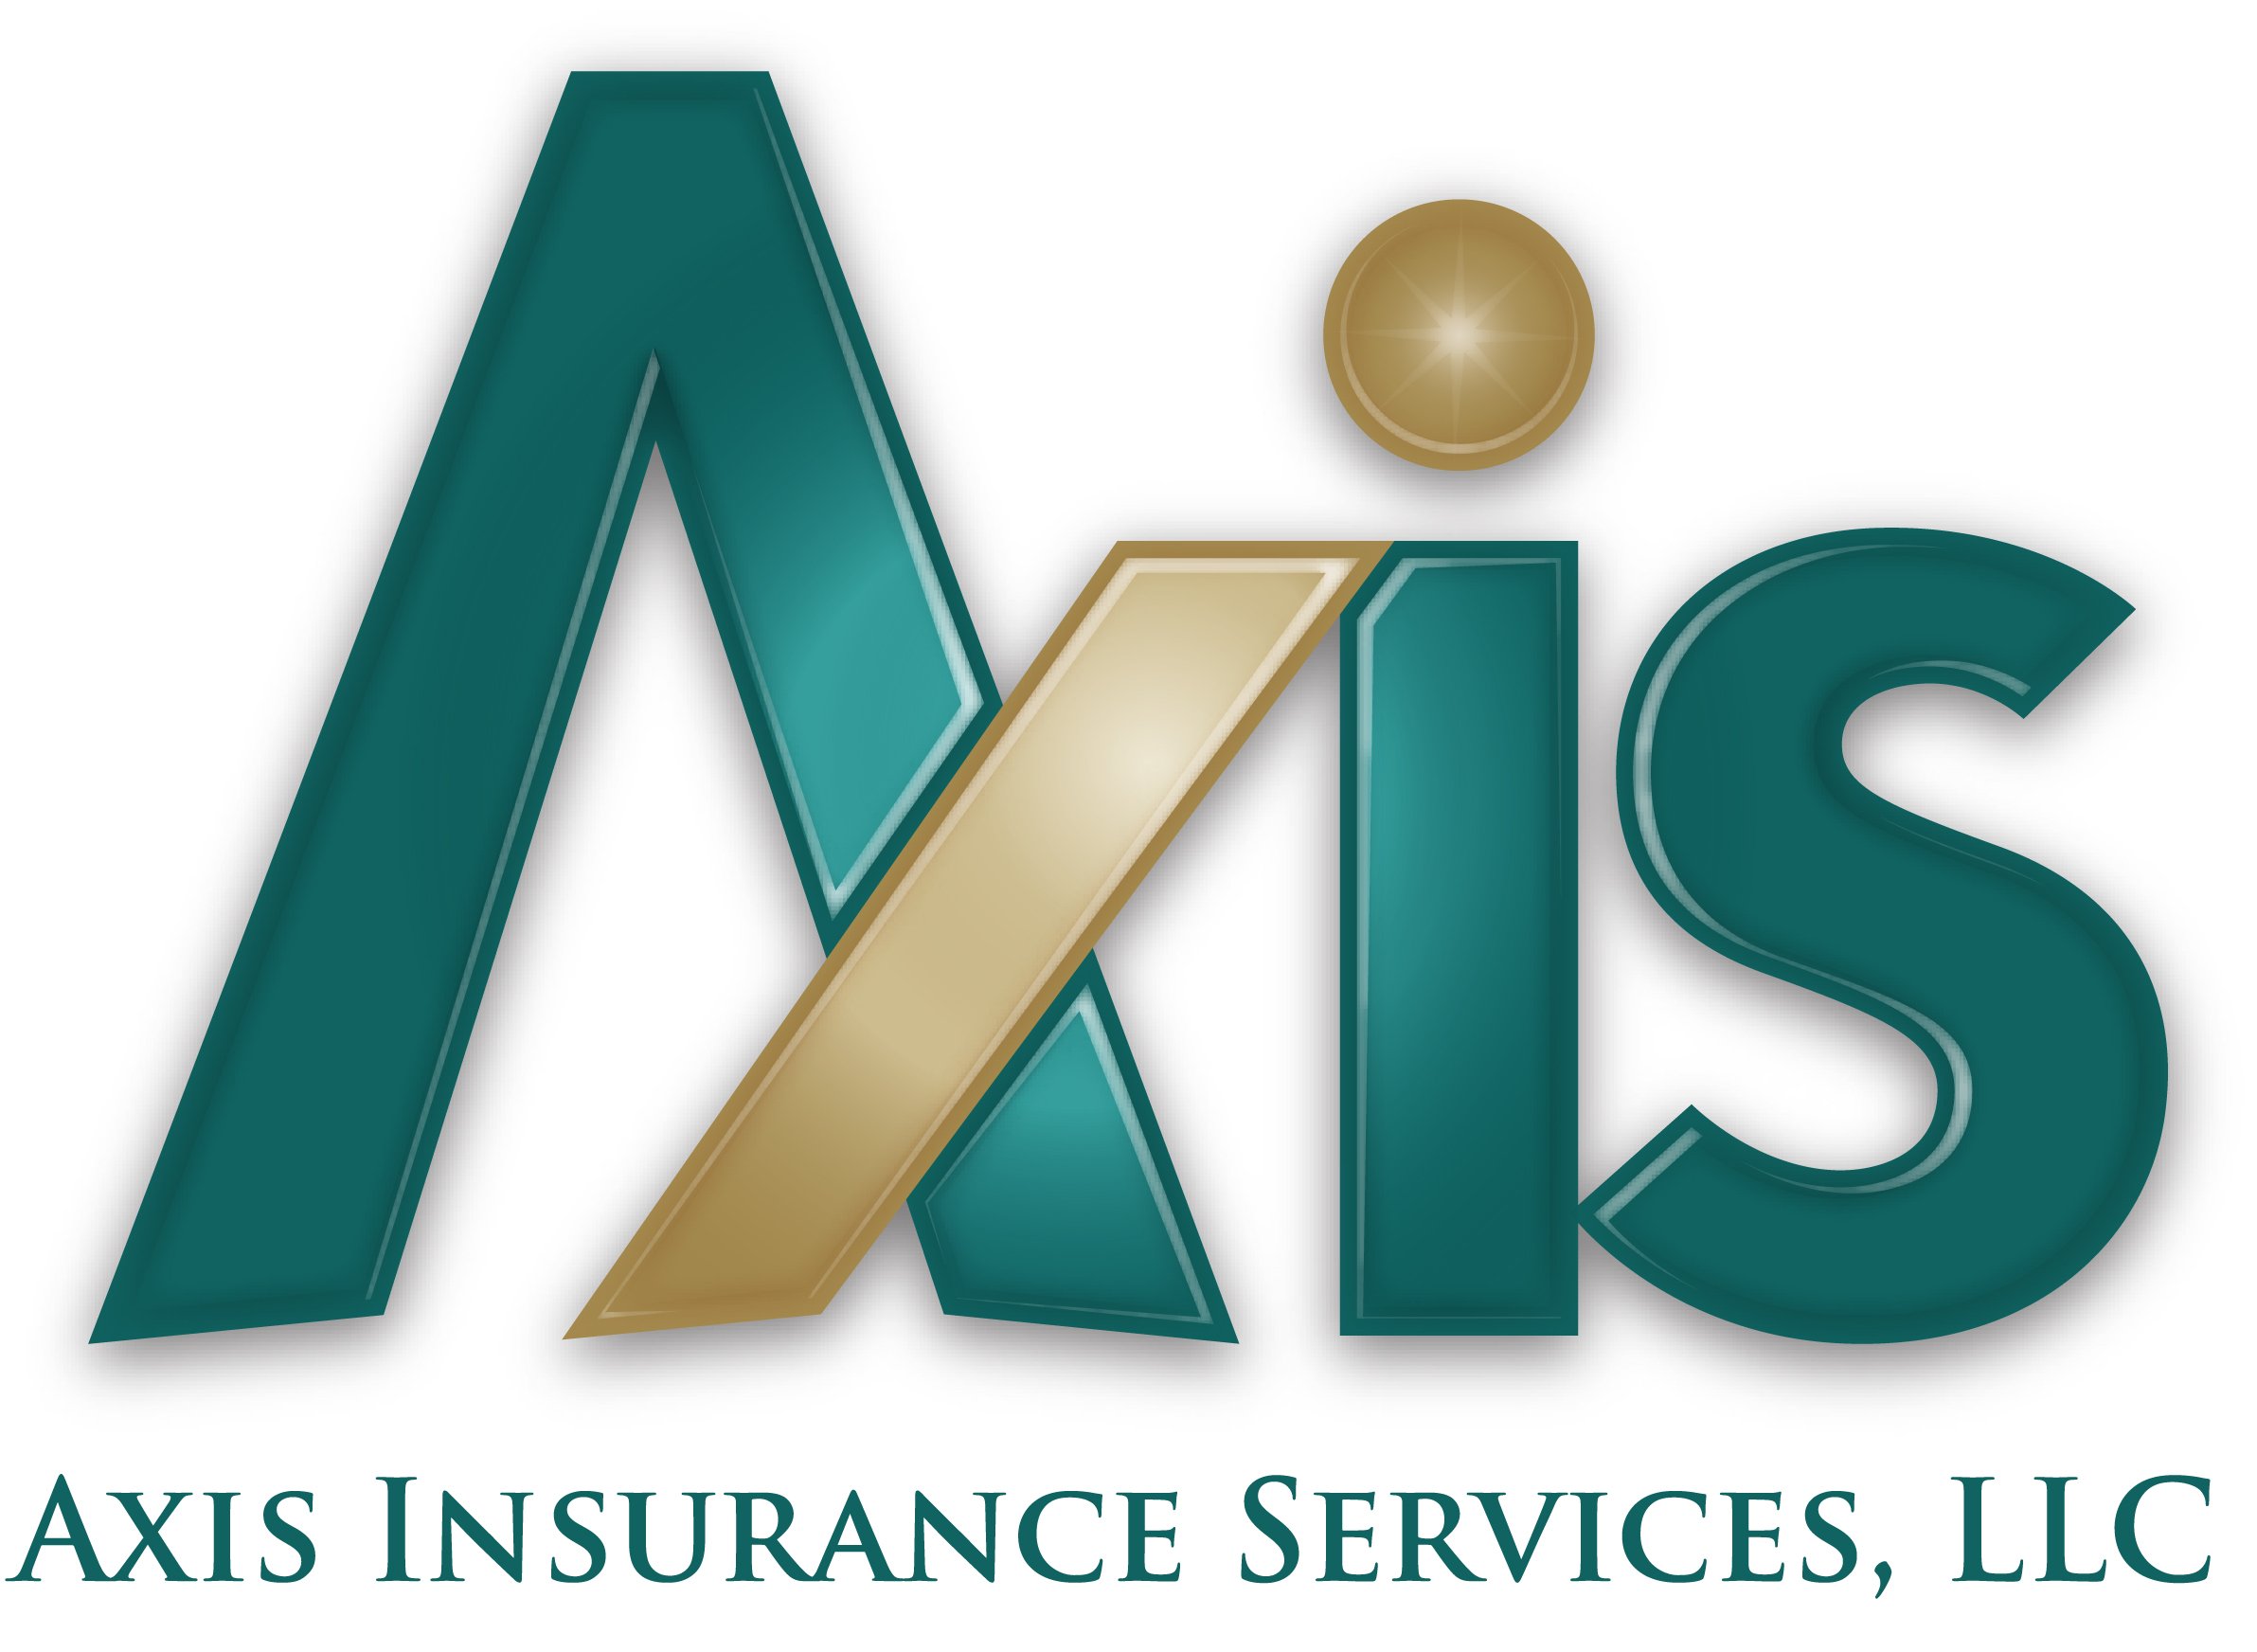 CONTACT INFO - Axis Insurance Services, LLC